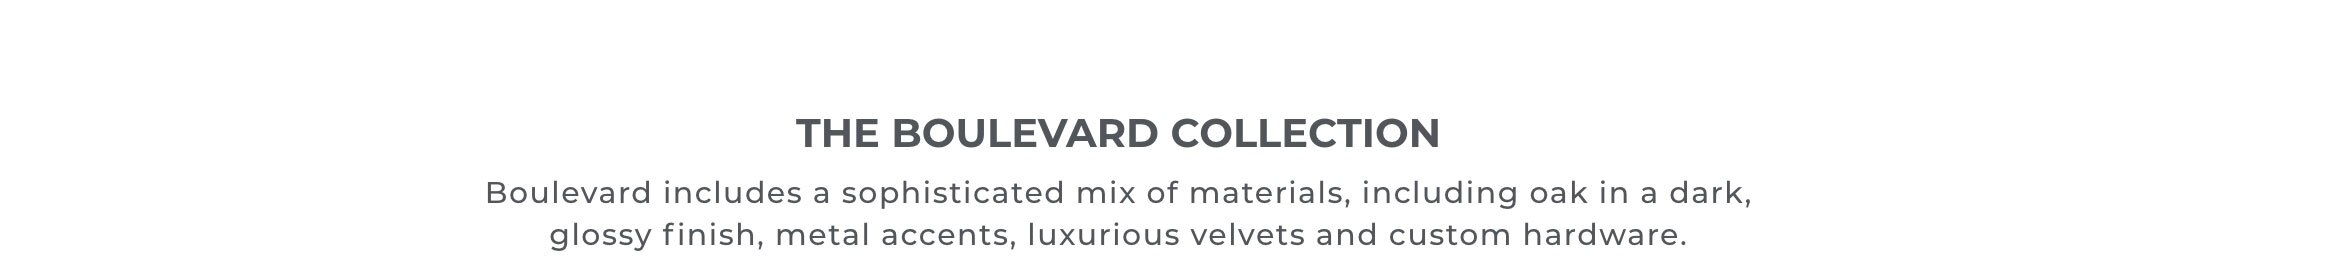 The Boulevard Collection